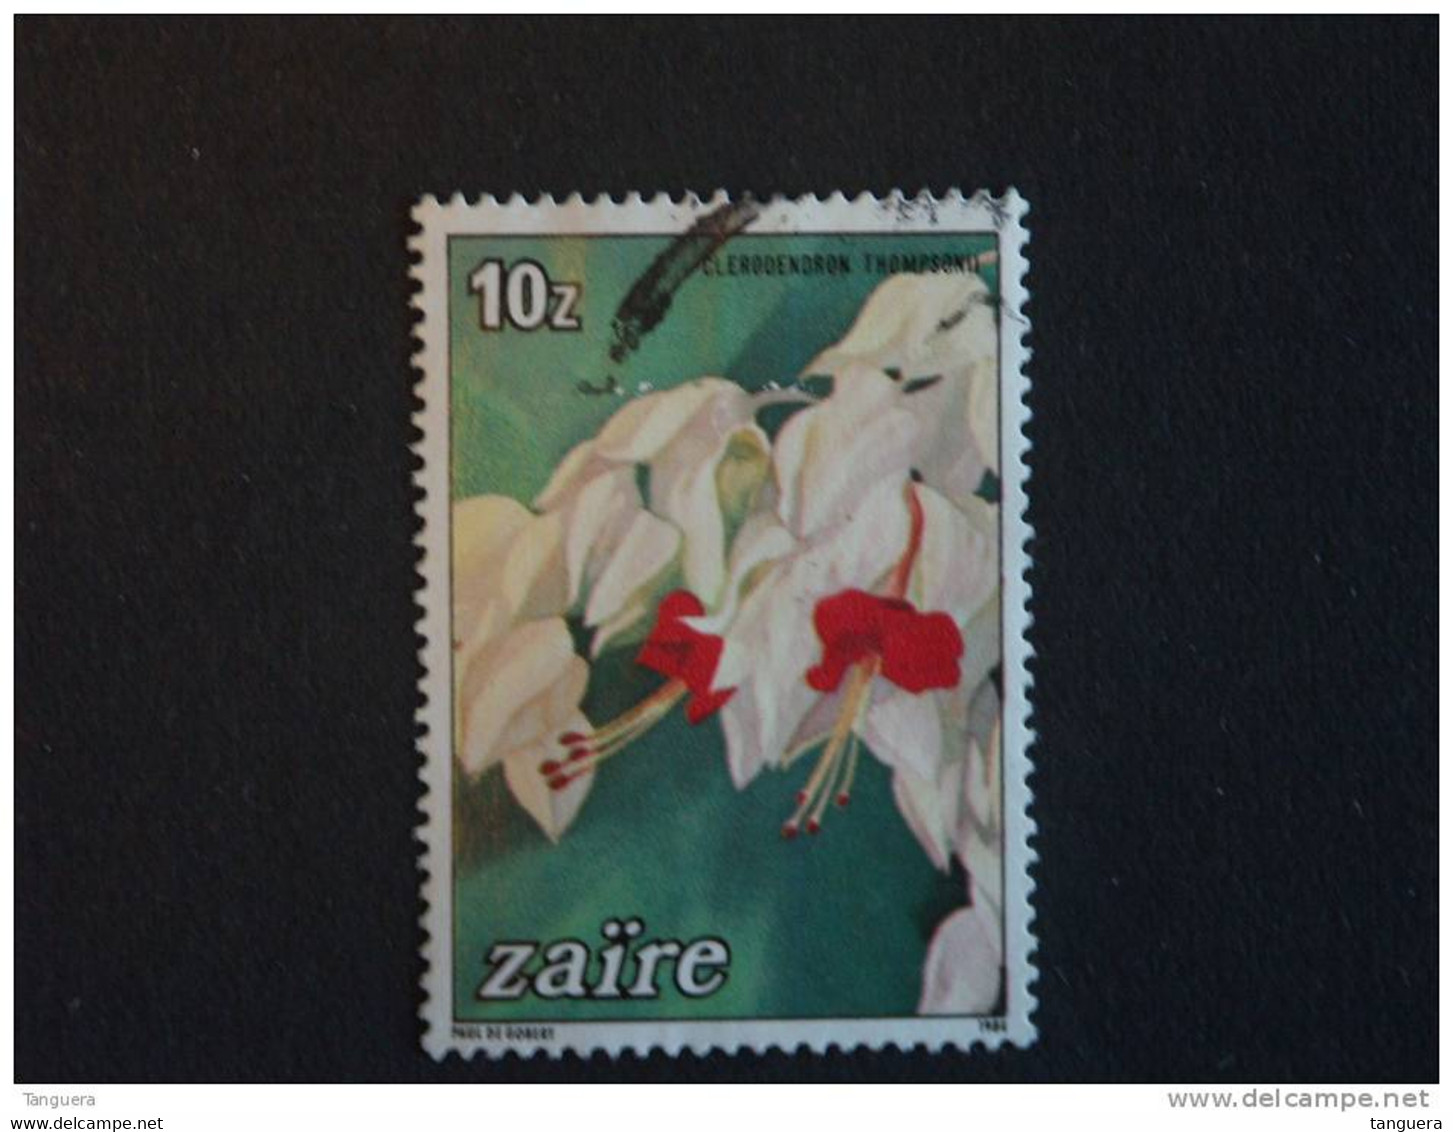 Congo Zaire 1984 Fleurs Bloemen Clerodendron Thomposnii Yv 1165 COB 1235 O - Used Stamps